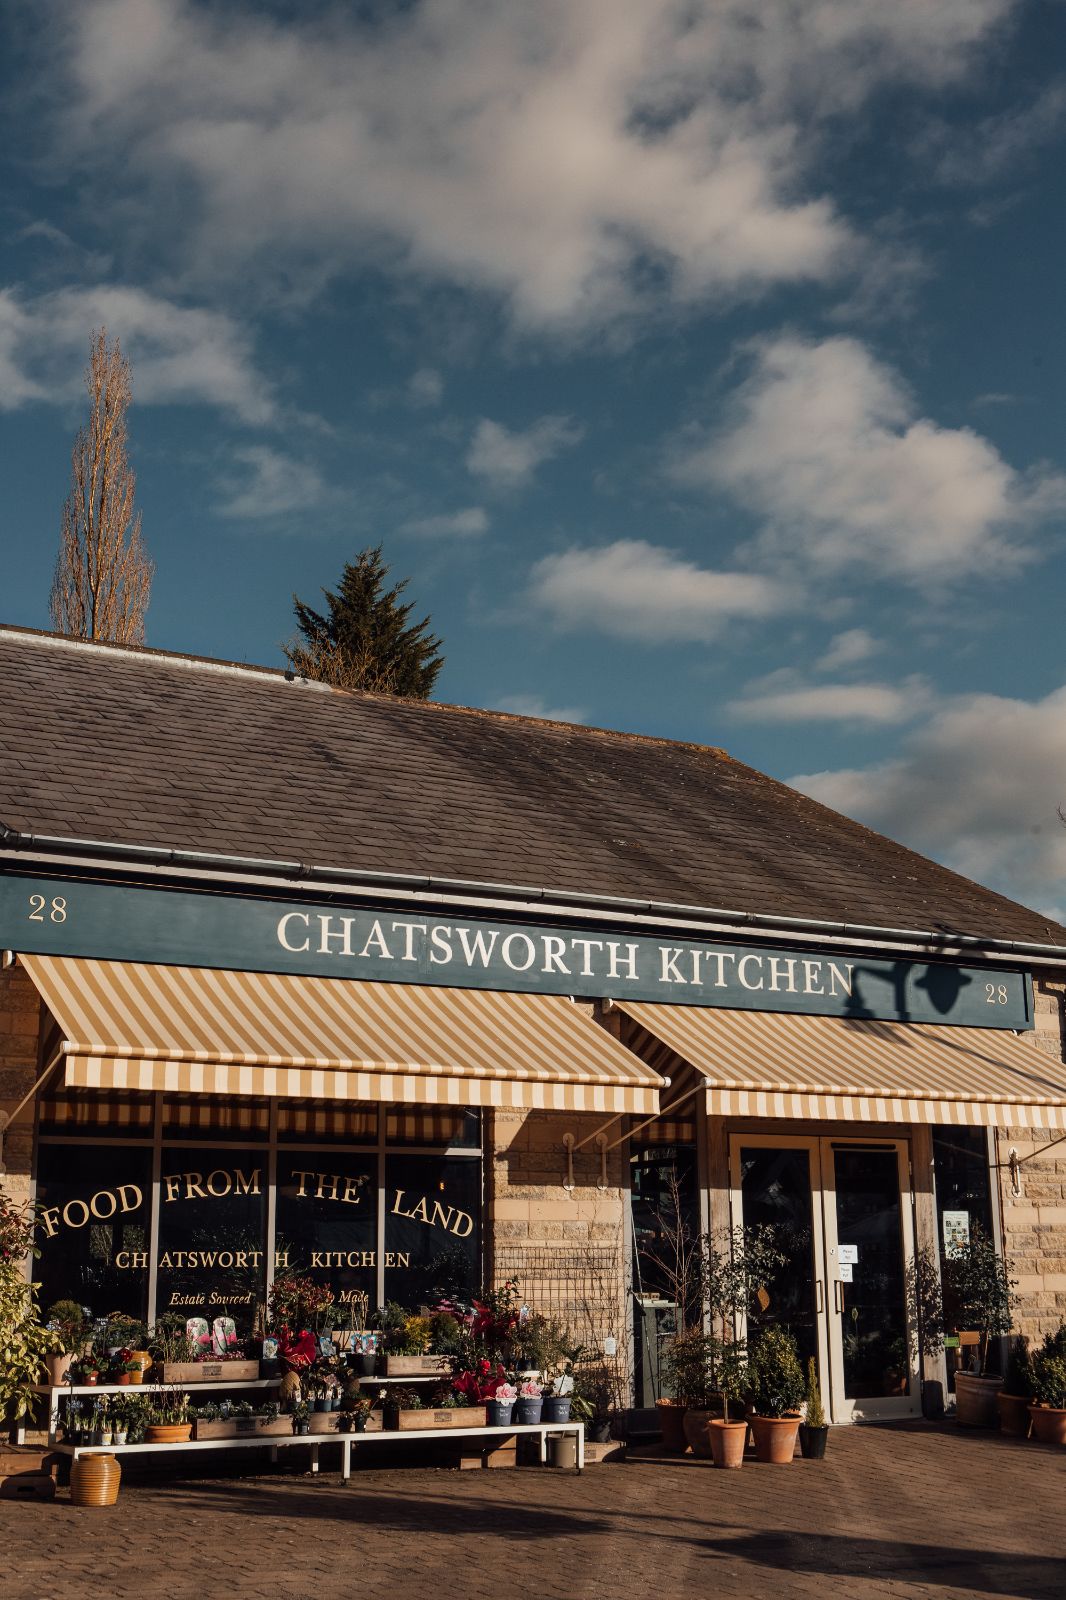 External view of Chatsworth Kitchen.  Blue facia with yellow and white striped awning. Warm light, blue sky with clouds